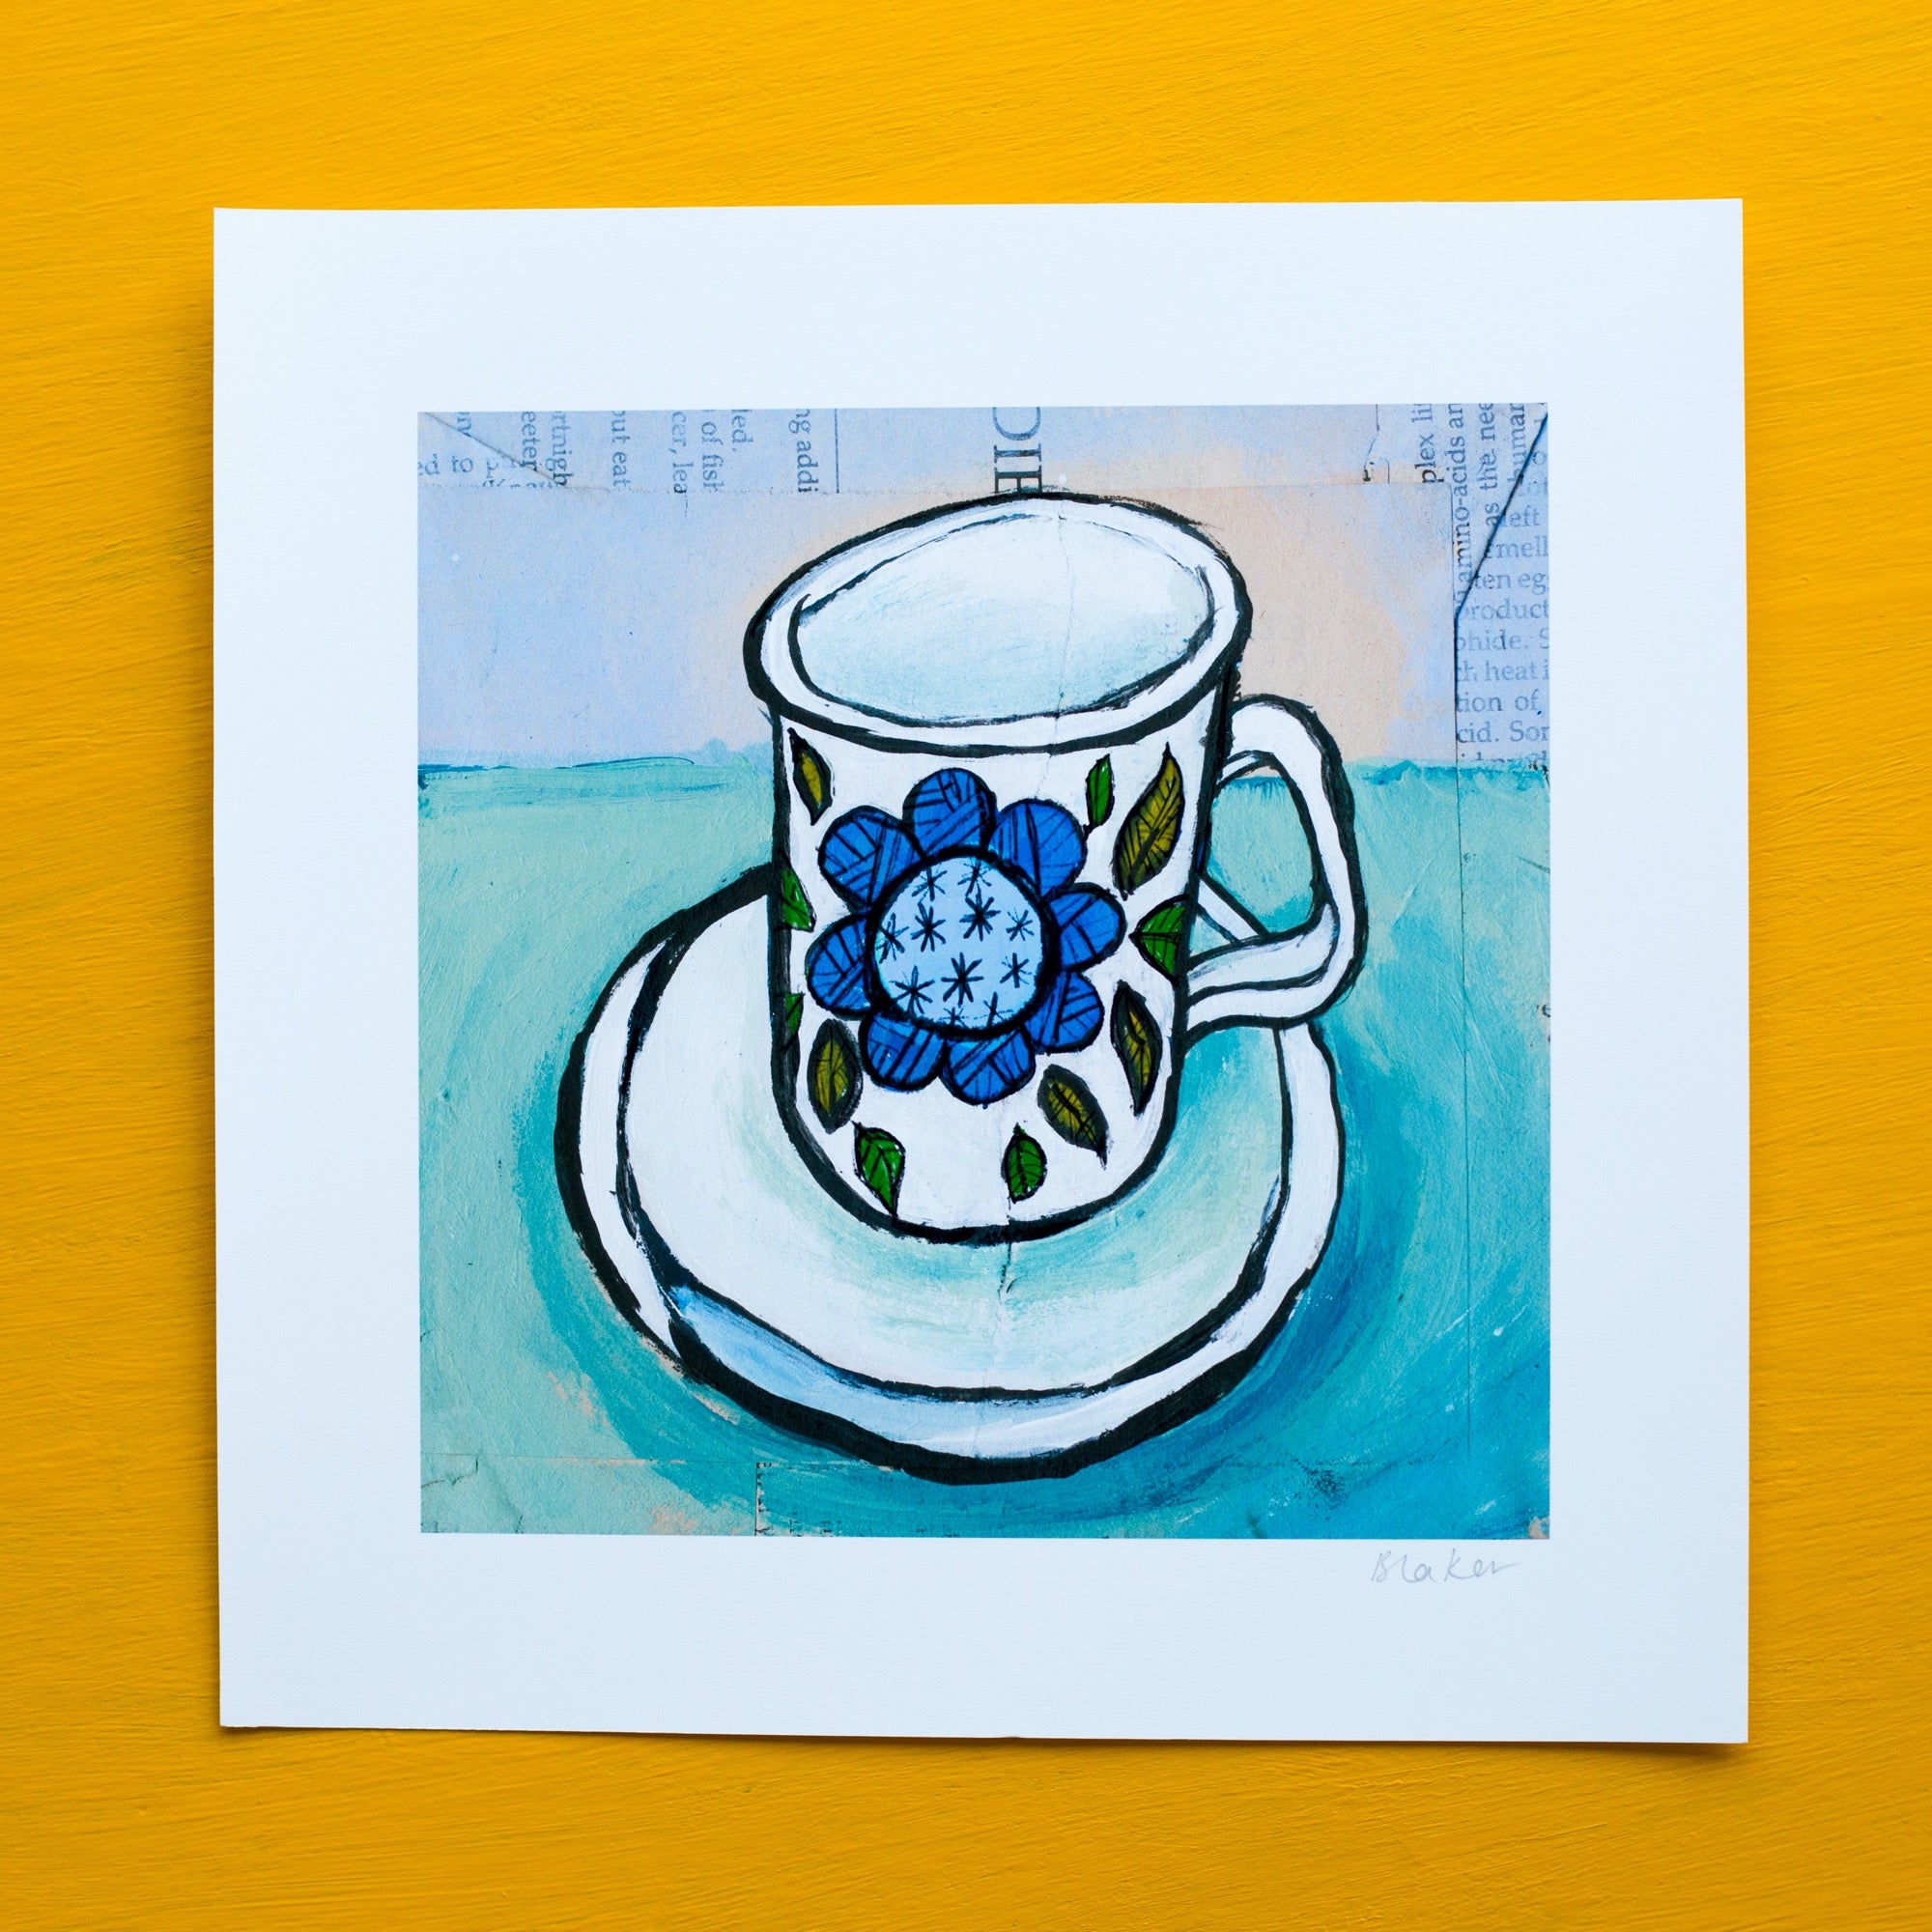 a wonky white teacup on saucer with a blue flower on it and green leaves. the background is pale blue and collaged book pages are visible under the paint 